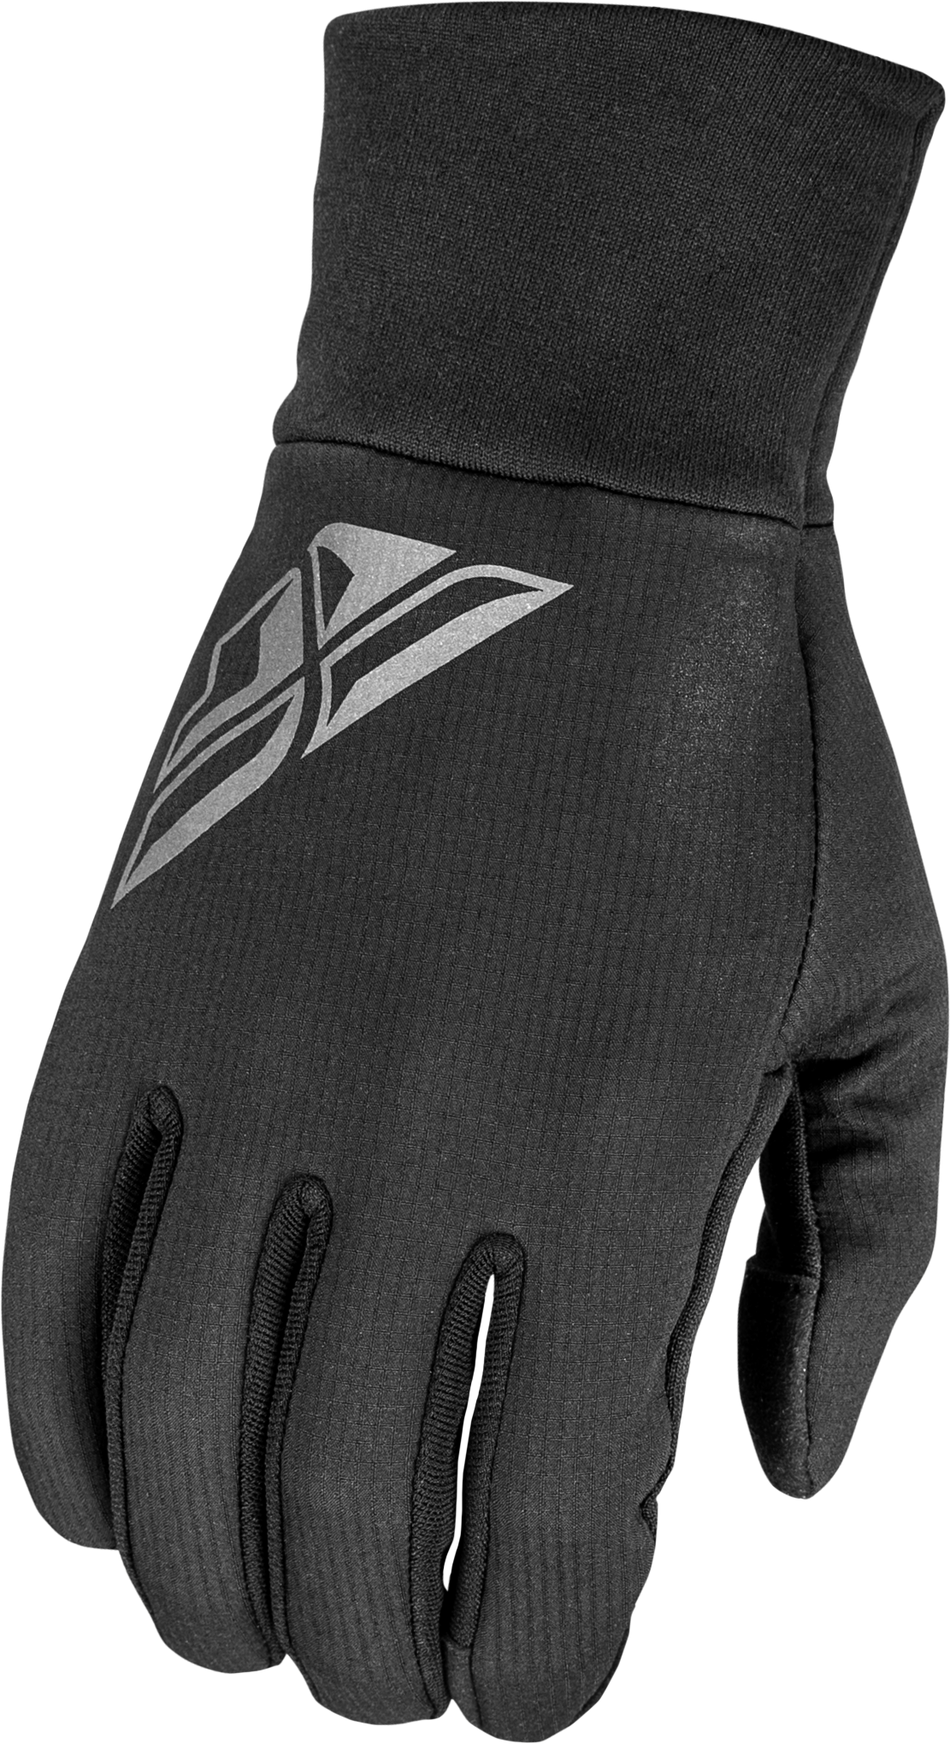 FLY RACING Glove Liners Black Xs 363-3960XS